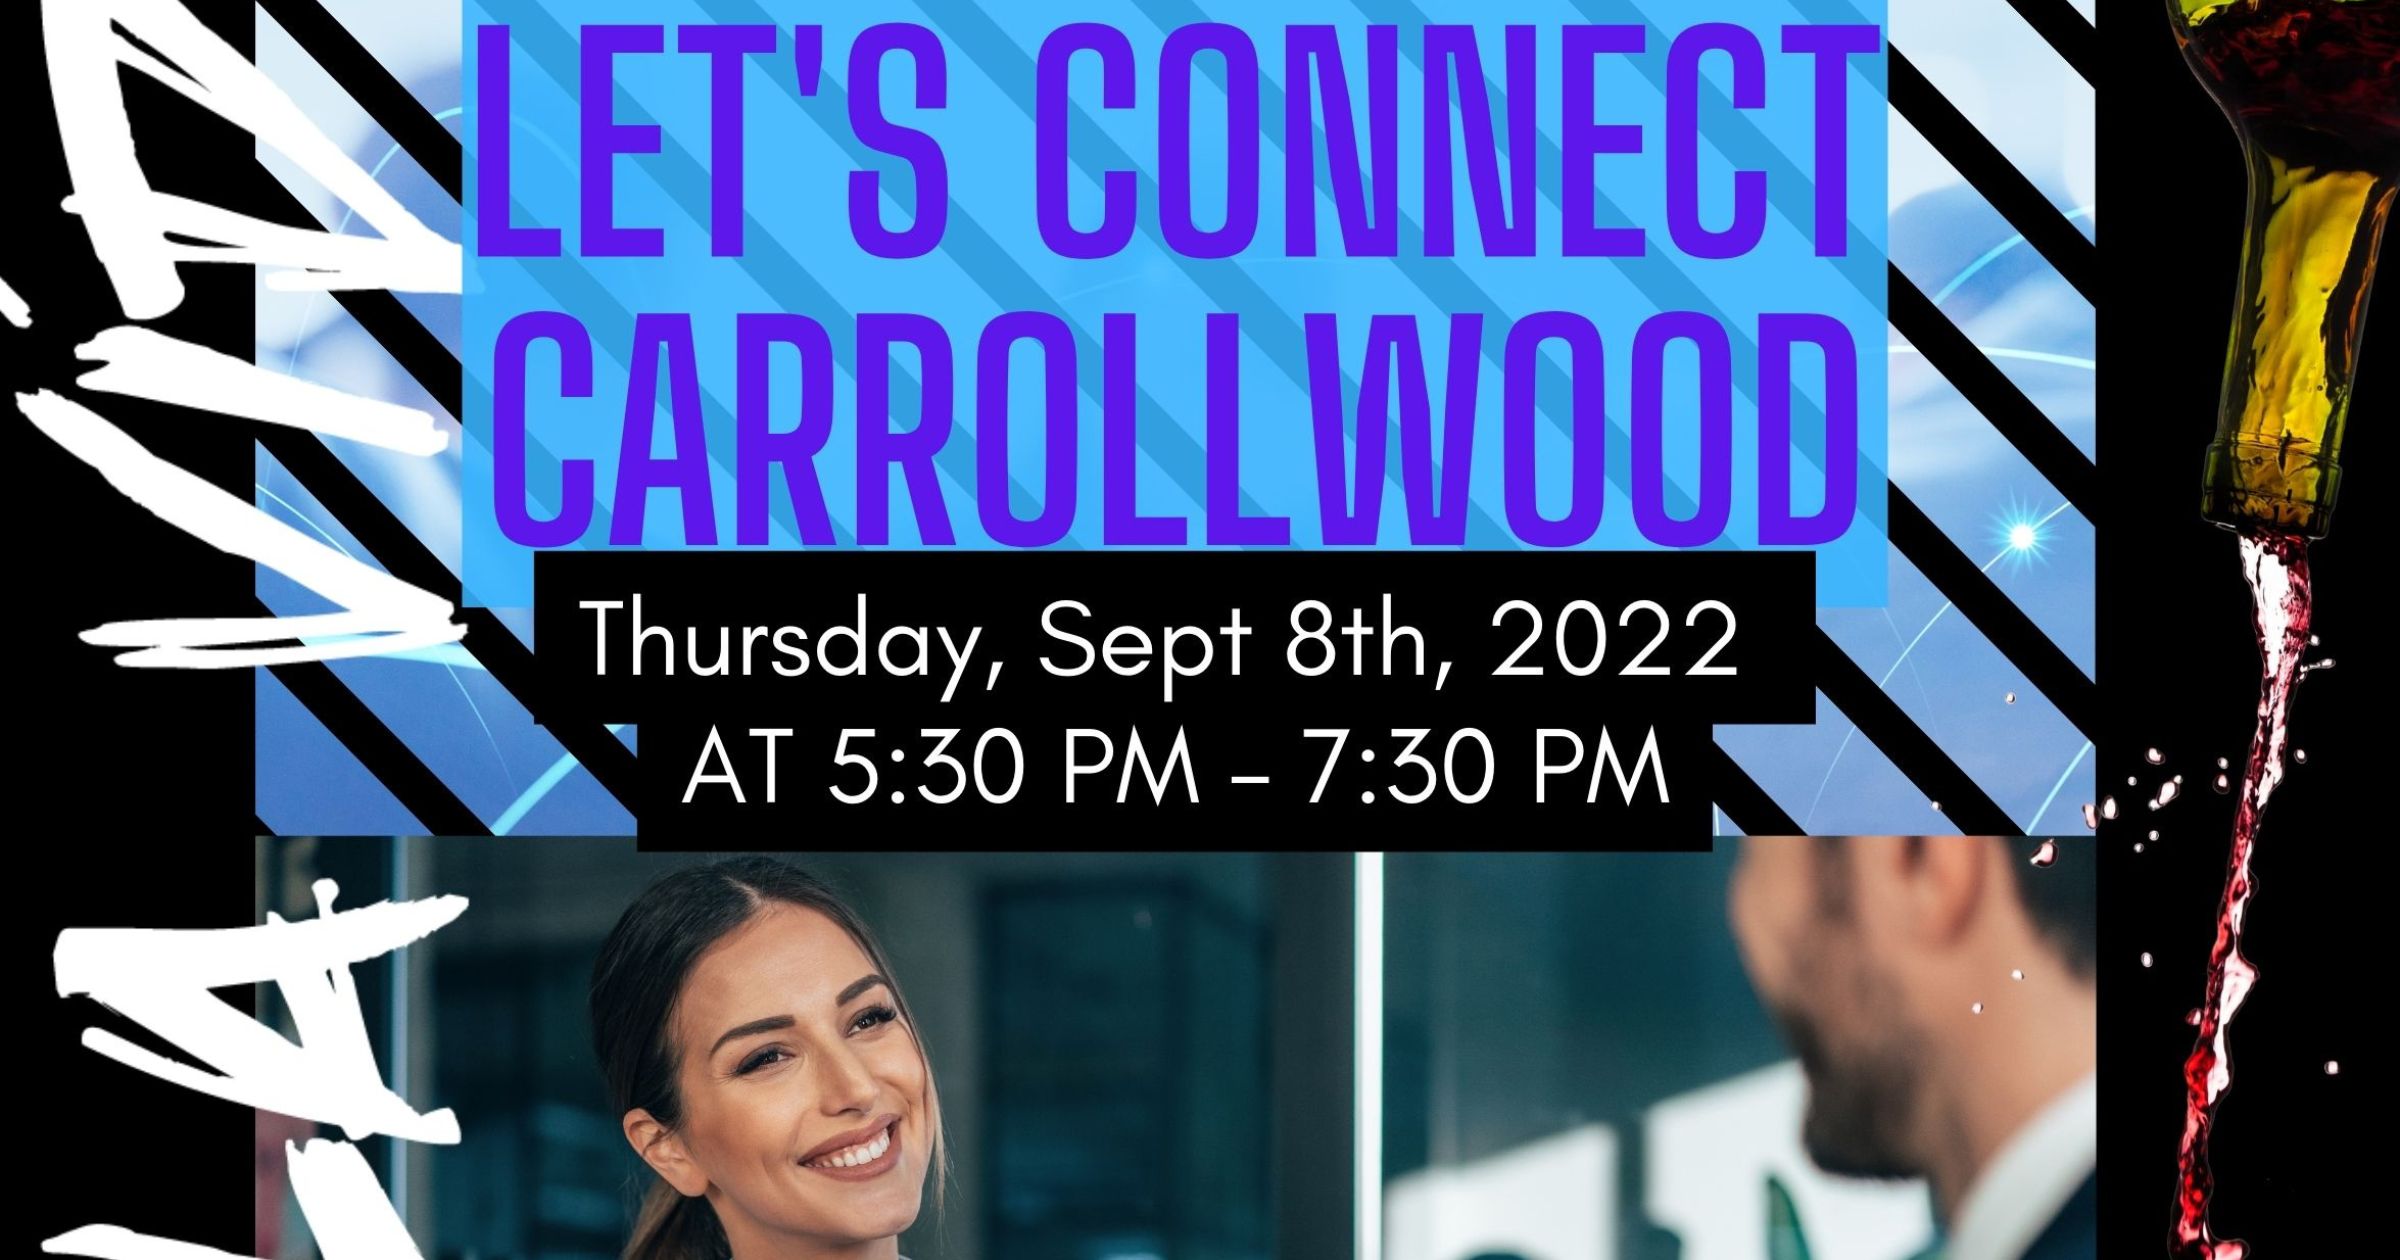 Let's Connect Carrollwood